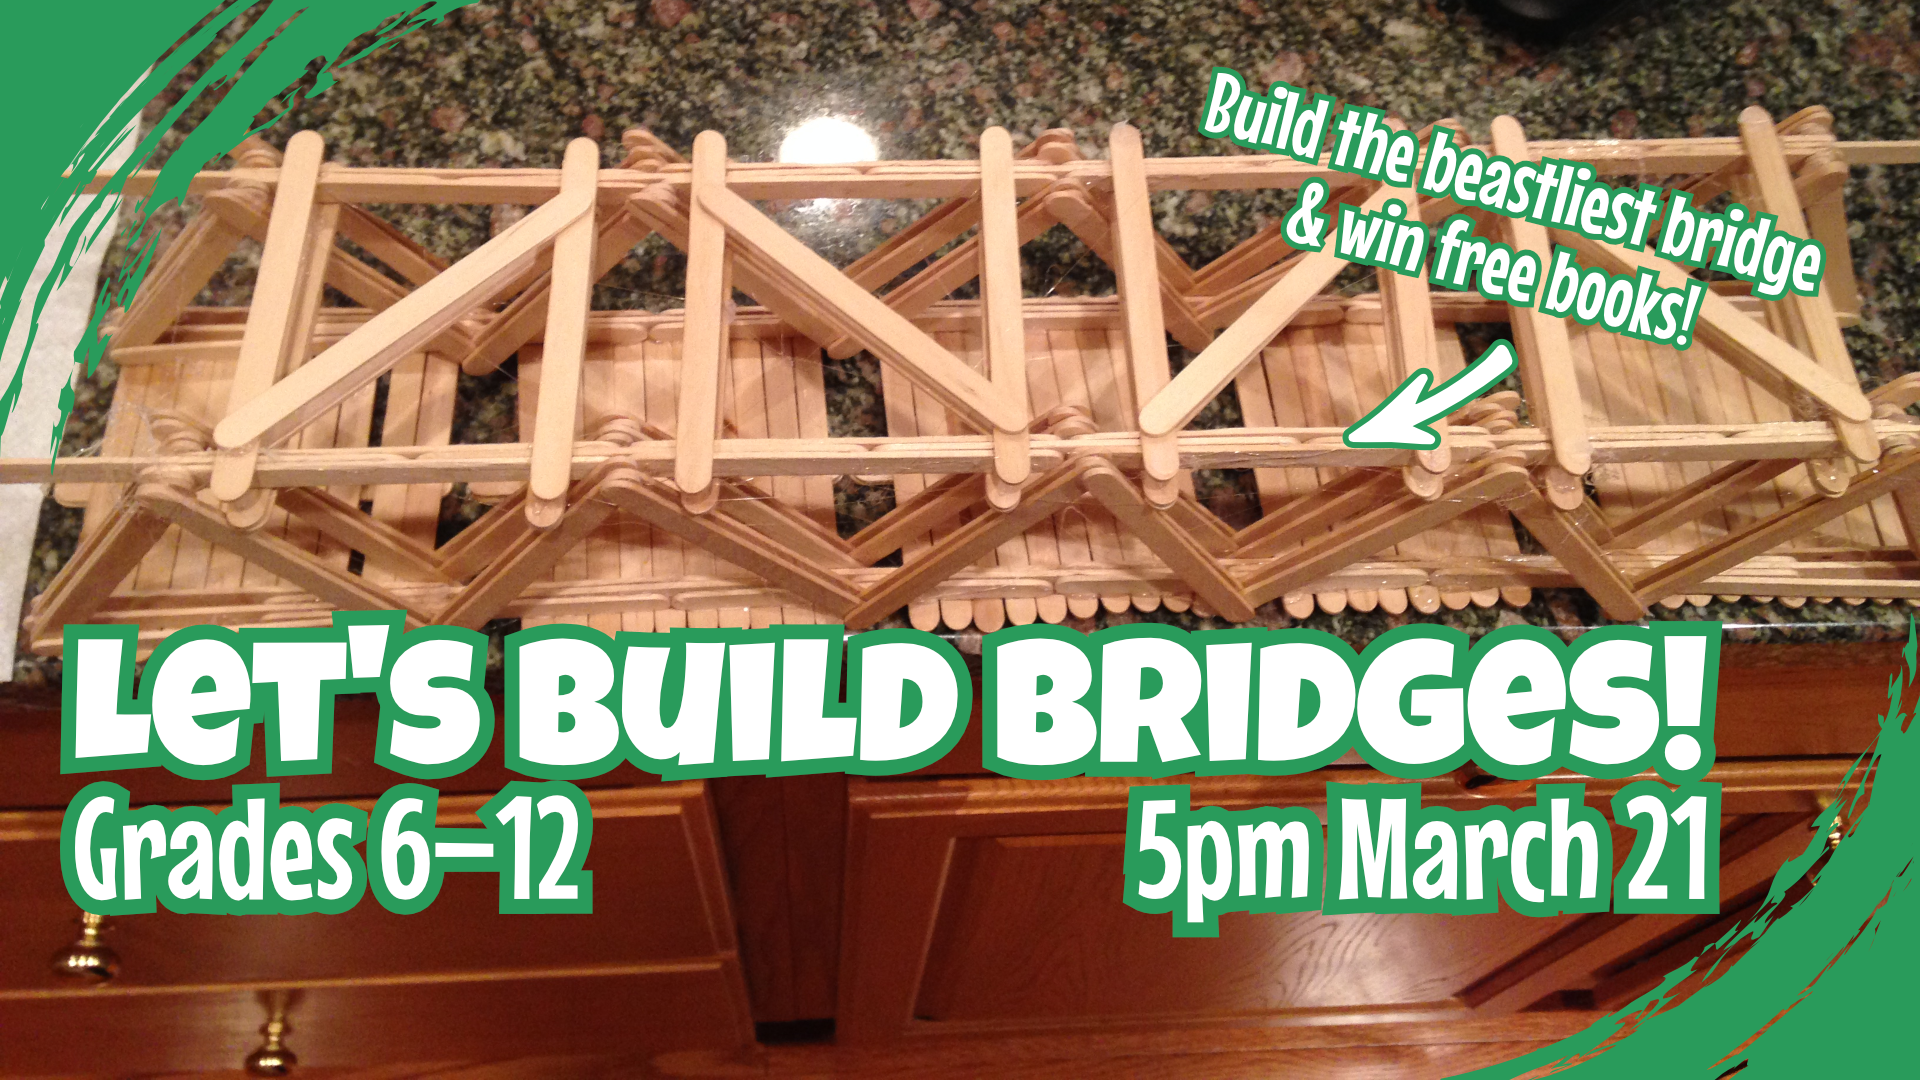 Let's Build Bridges, March 21 at 5pm, intended for grades 6 through 12